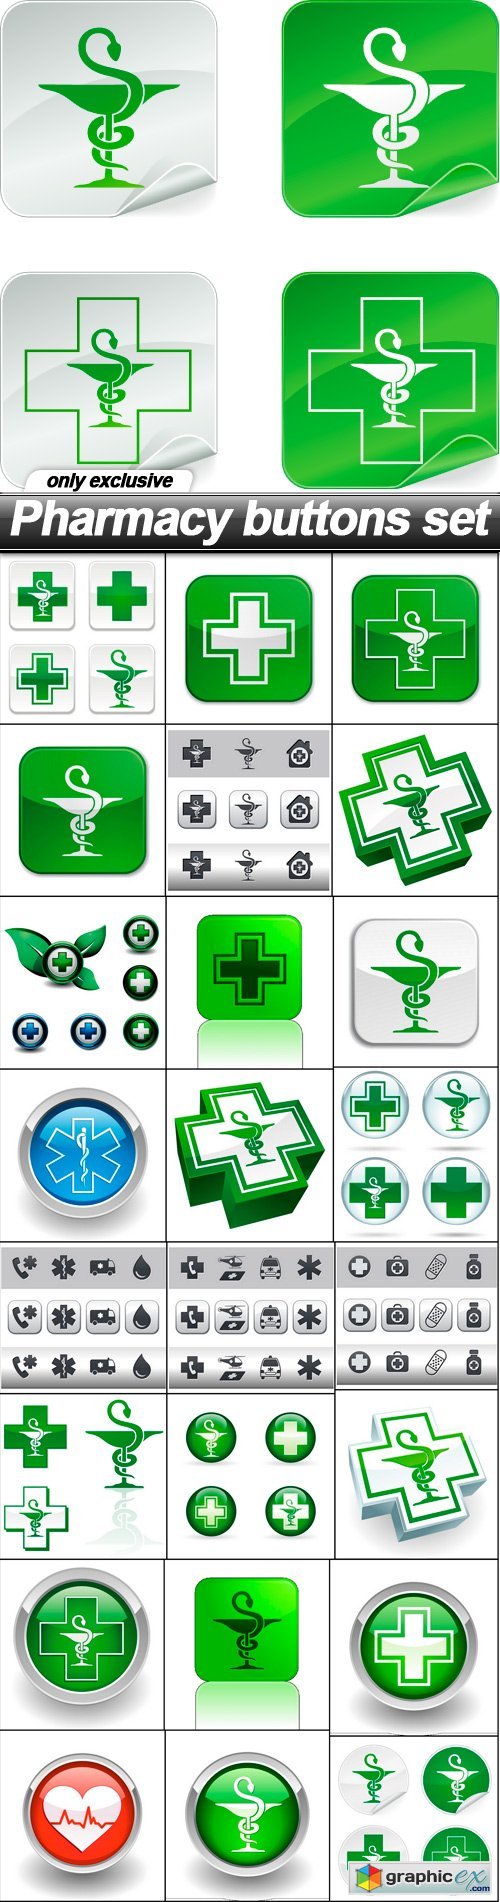 Pharmacy buttons set - 25 EPS